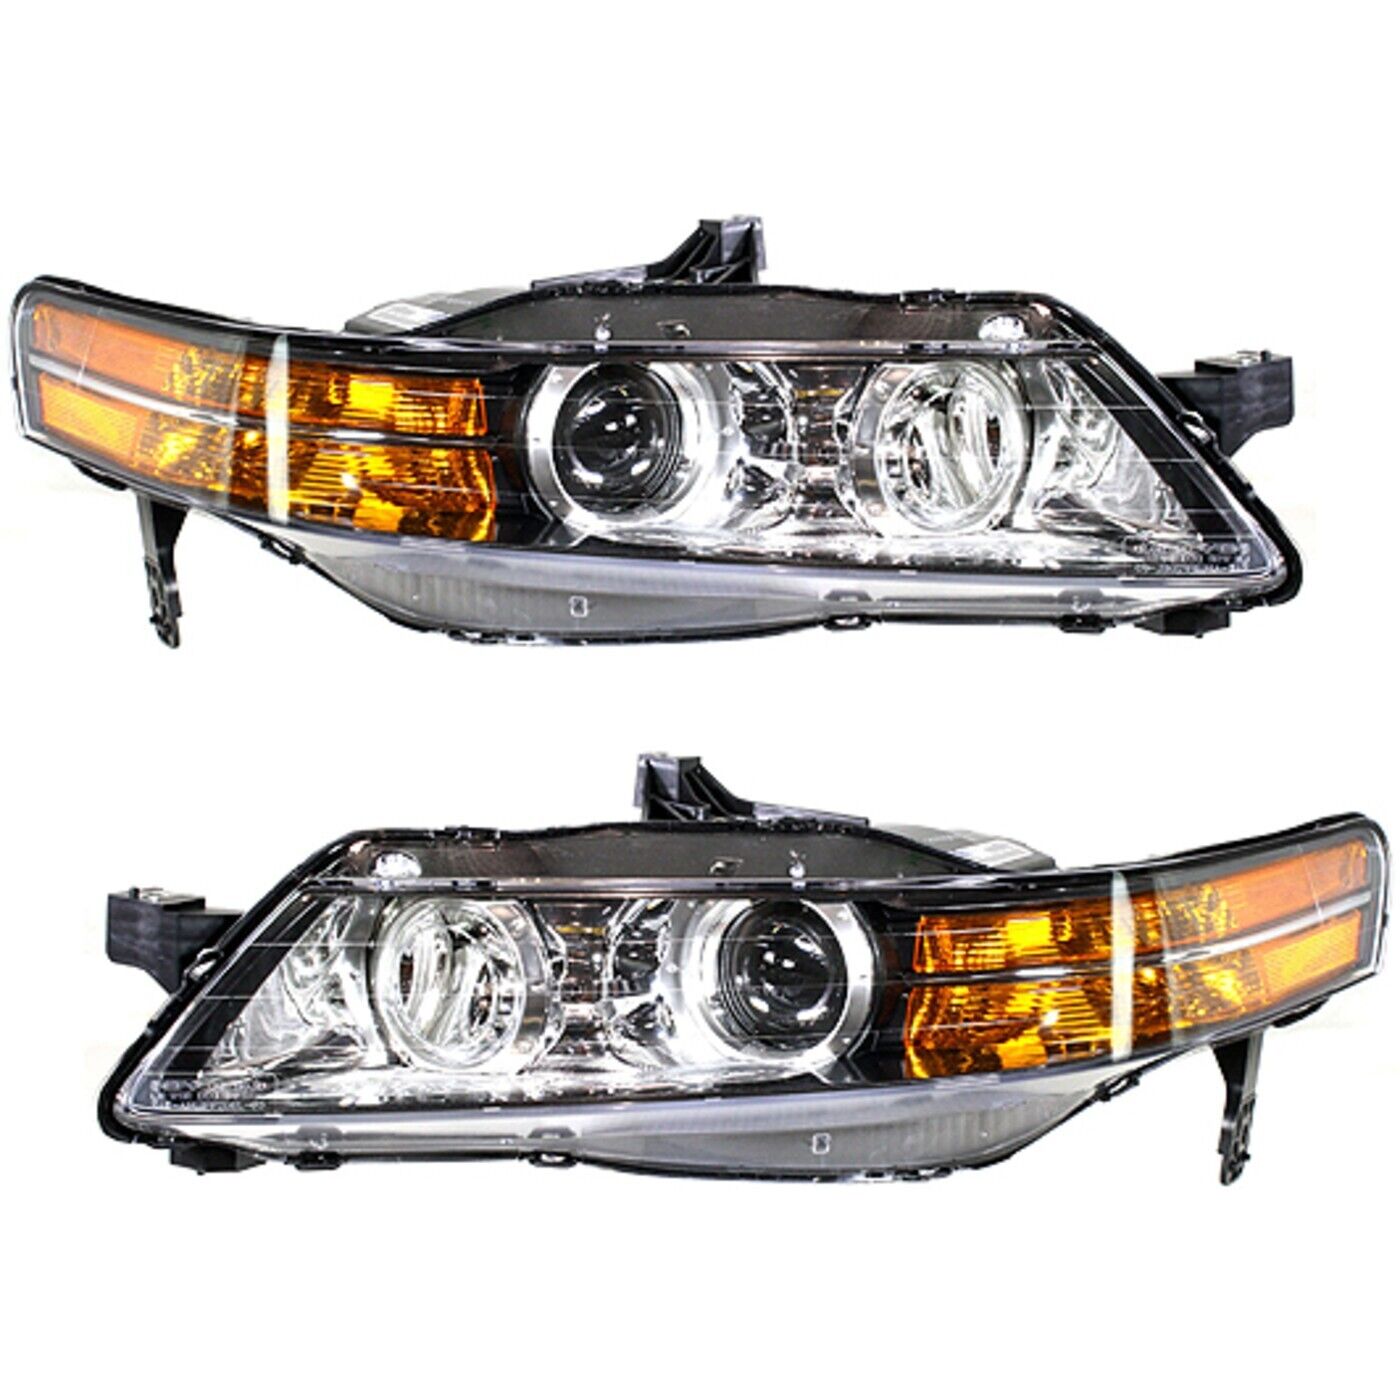 Headlight Set For 2007-2008 Acura TL Base Model Left and Right 2Pc